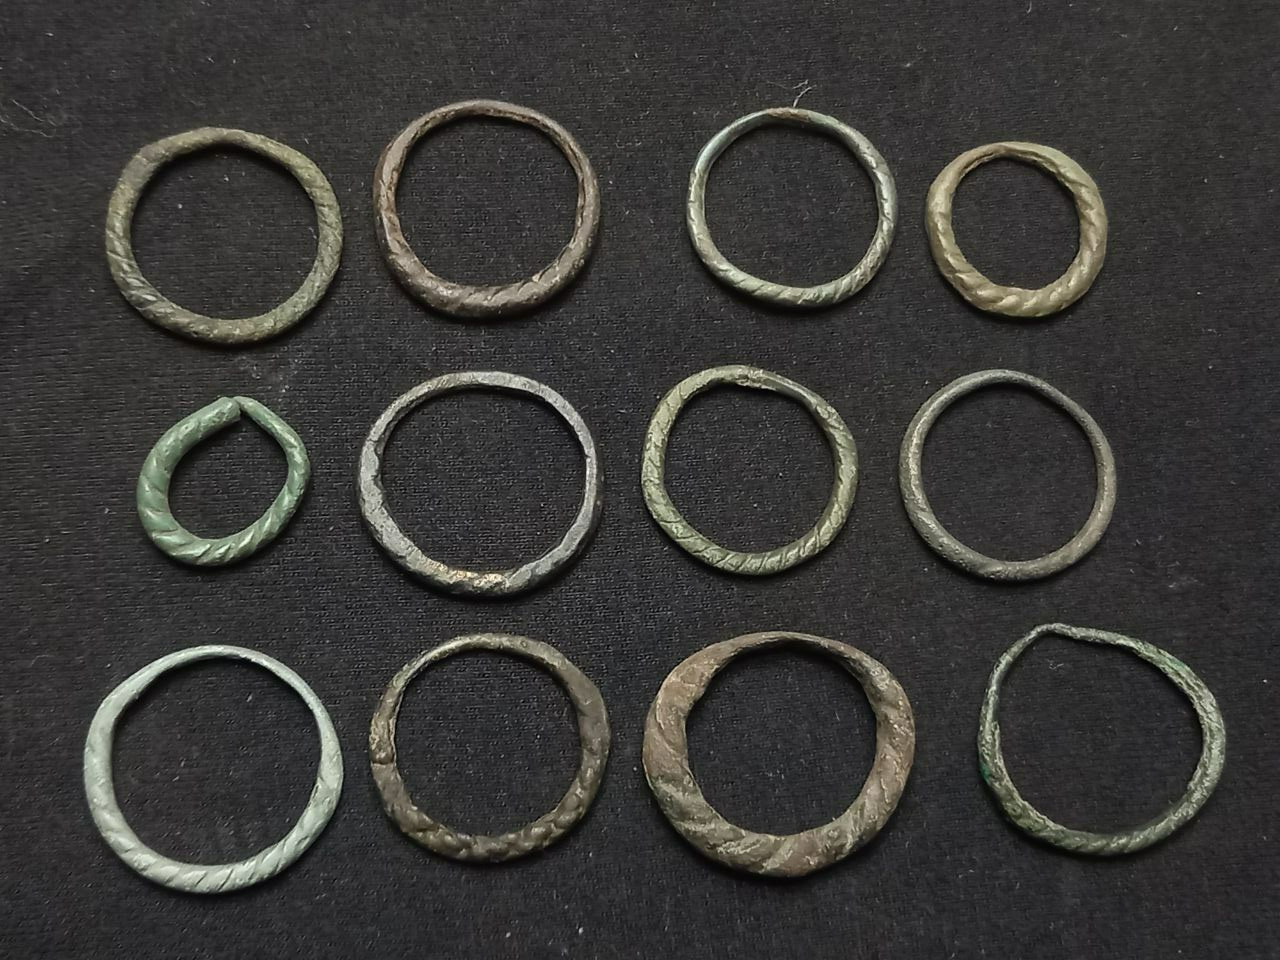 Ancient twisted rings 9-13 centuries AD. 12 Pcs